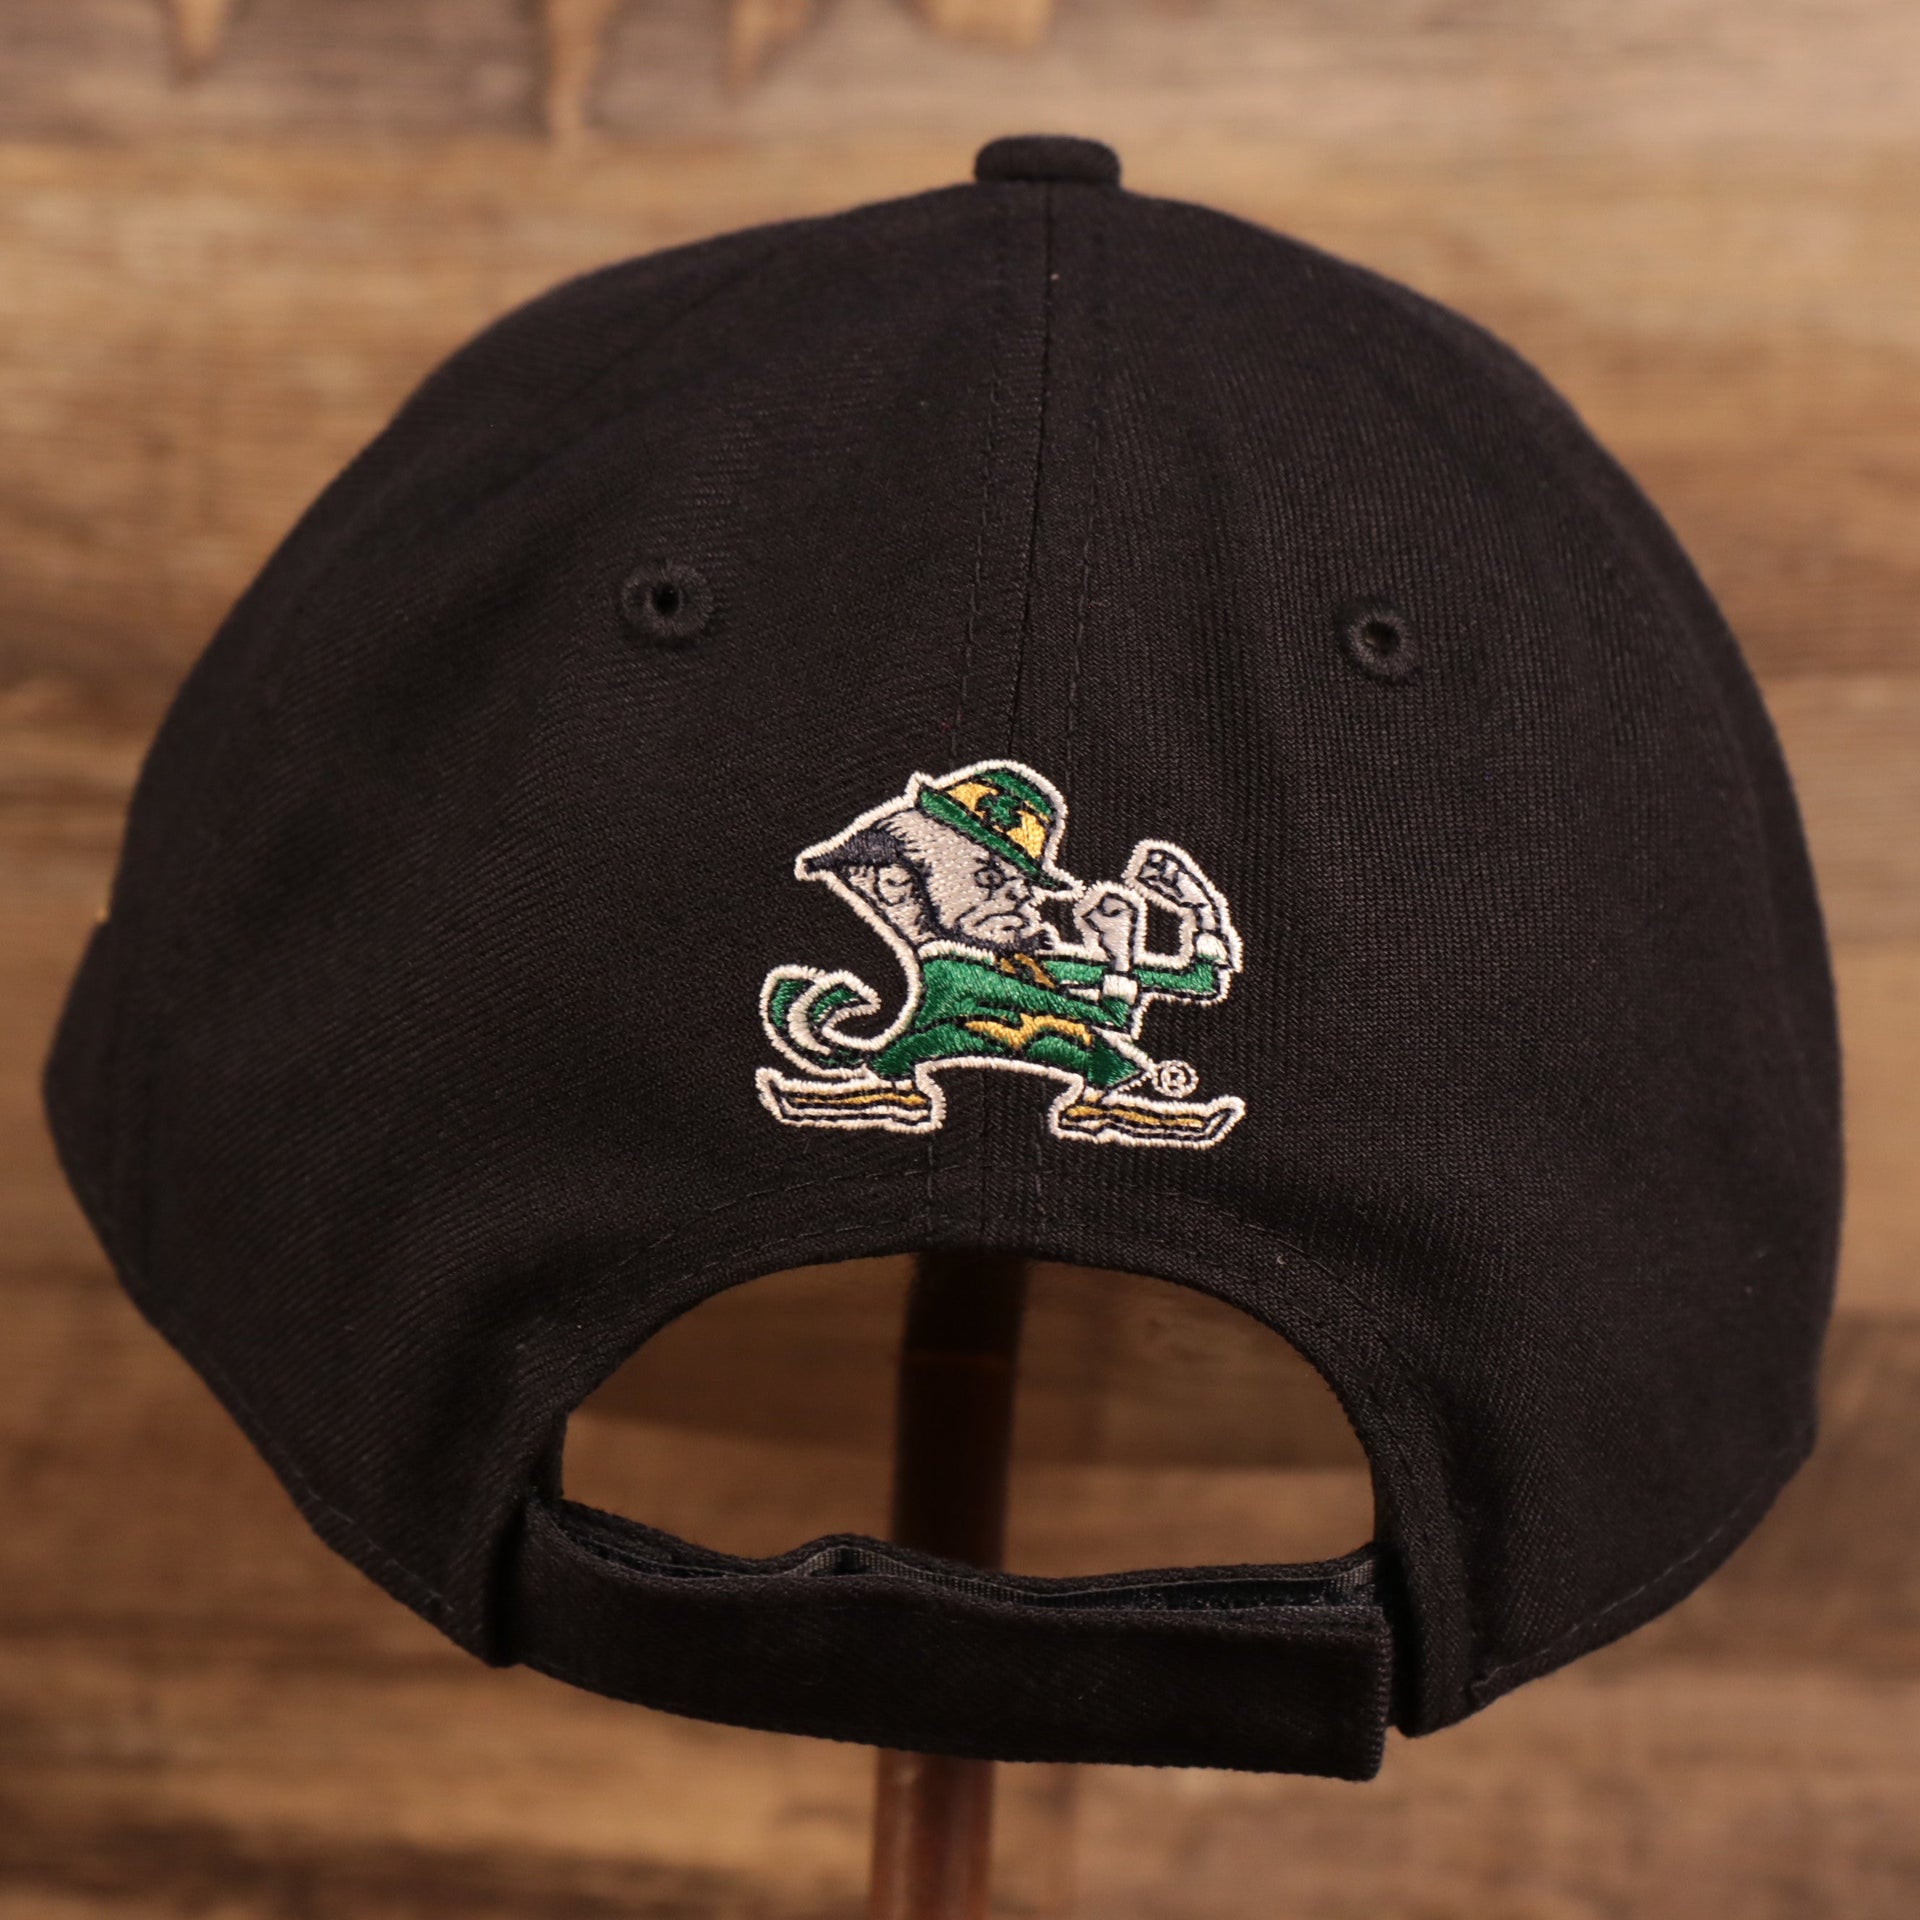 NEW ERA | NOTRE DAME FIGHTIN IRISH | THE LEAGUE | 9FORTY DAD HAT | VELCRO ADJUSTABLE | TEAM BACK PATCH | NAVY | OSFM